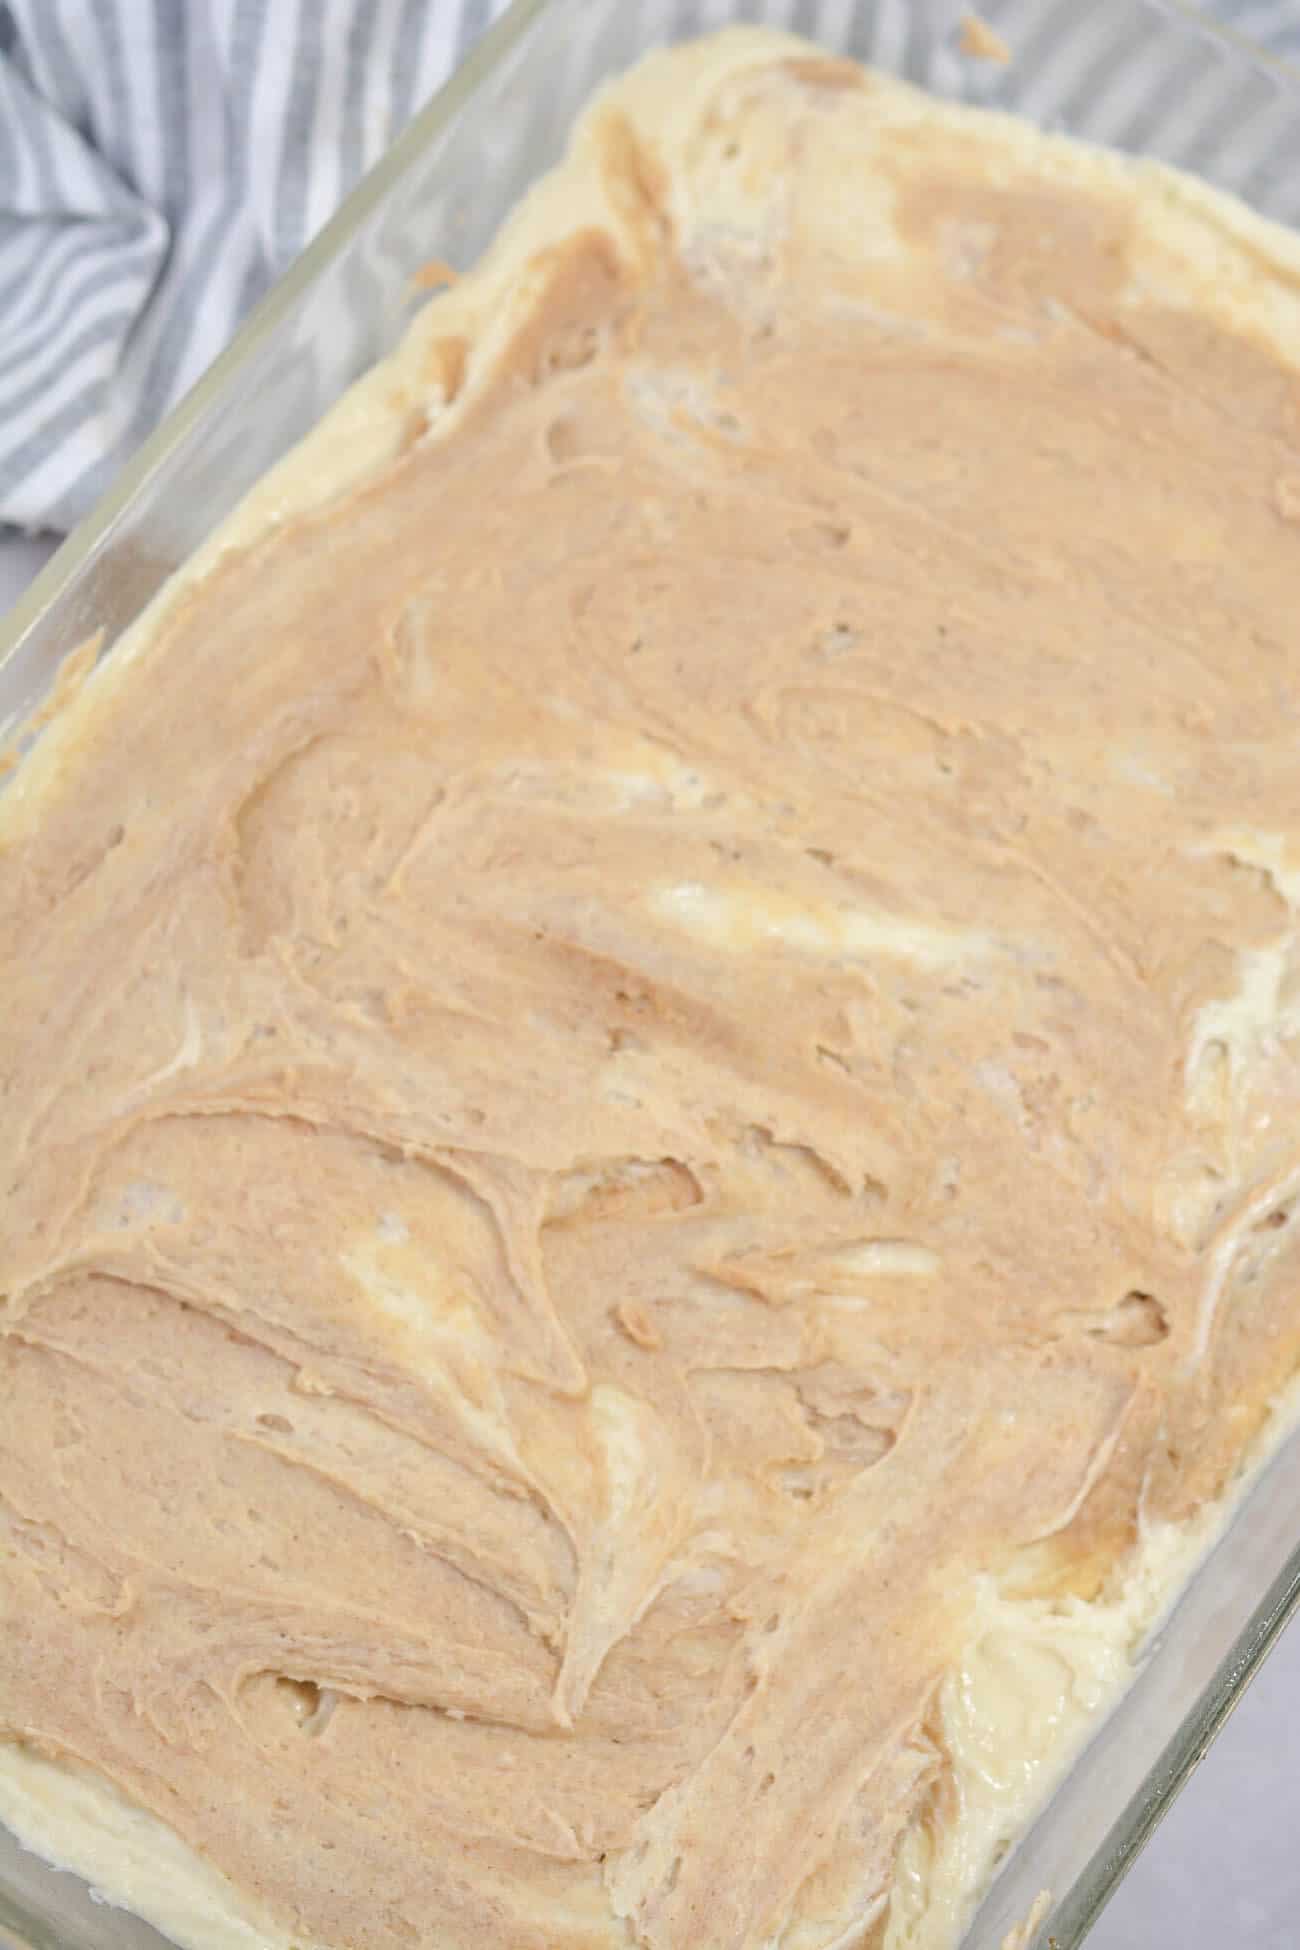 Spread the topping over the cake batter, and swirl to combine. 